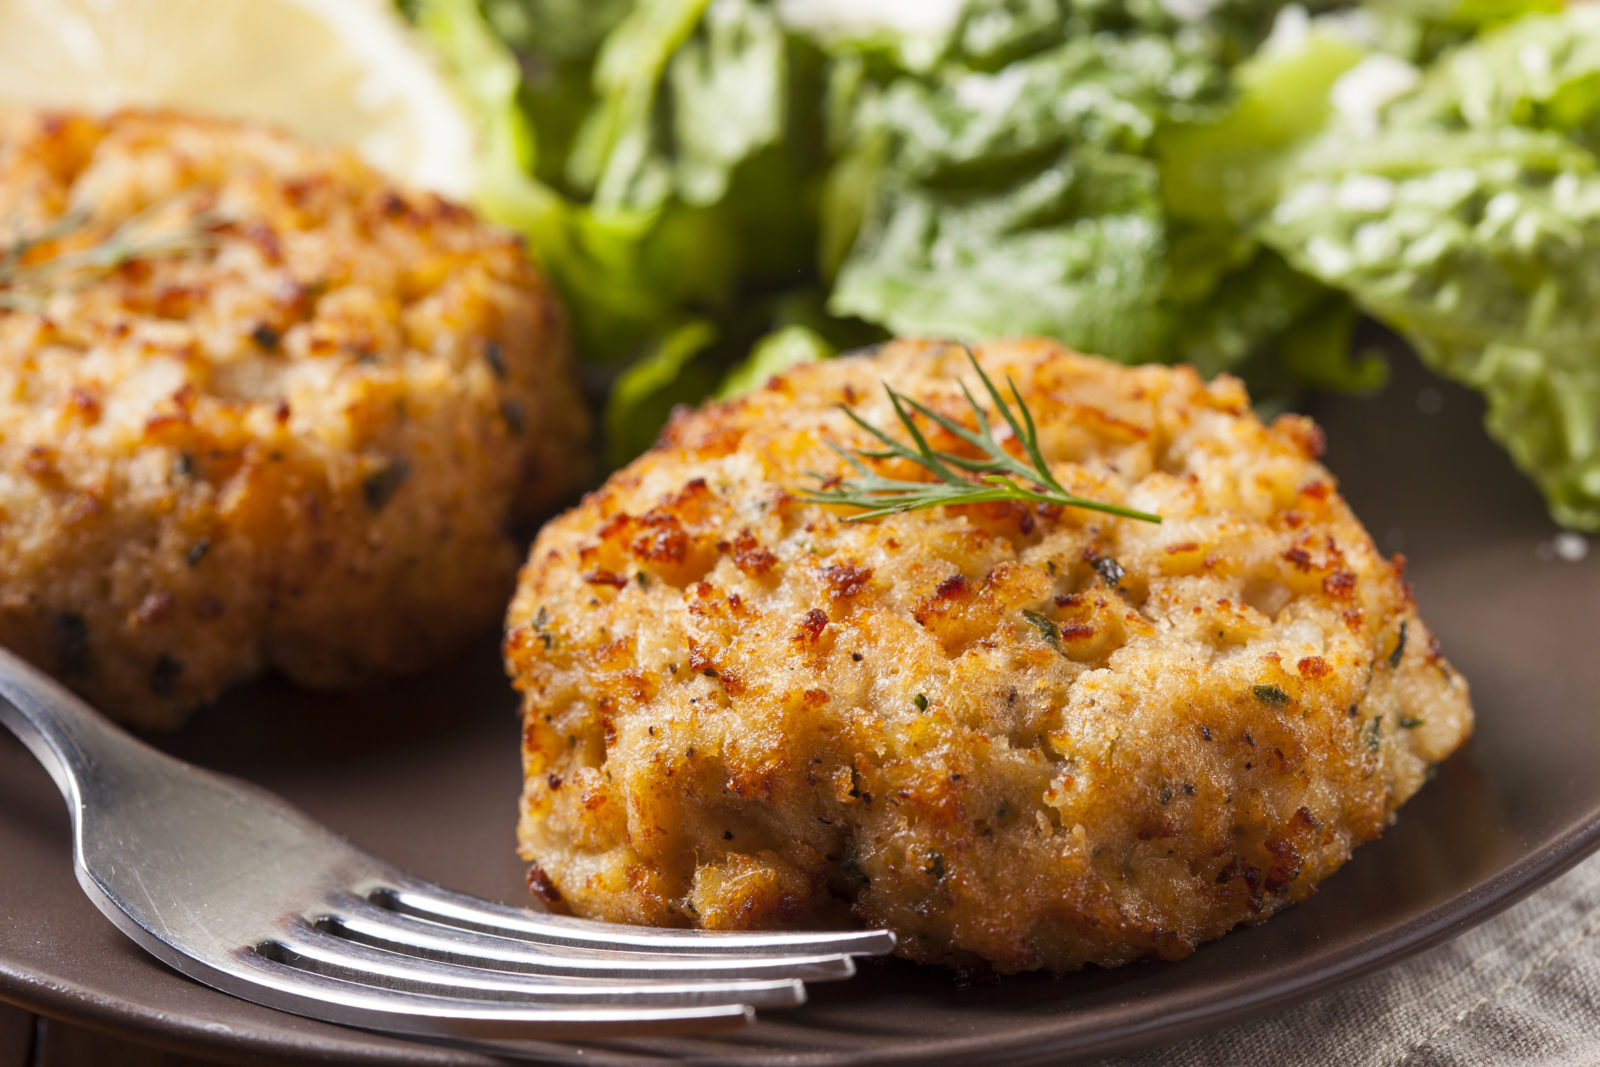 Two delicious looking fish cakes on a plate with a fork in the foreground and salad in the background of the plate.